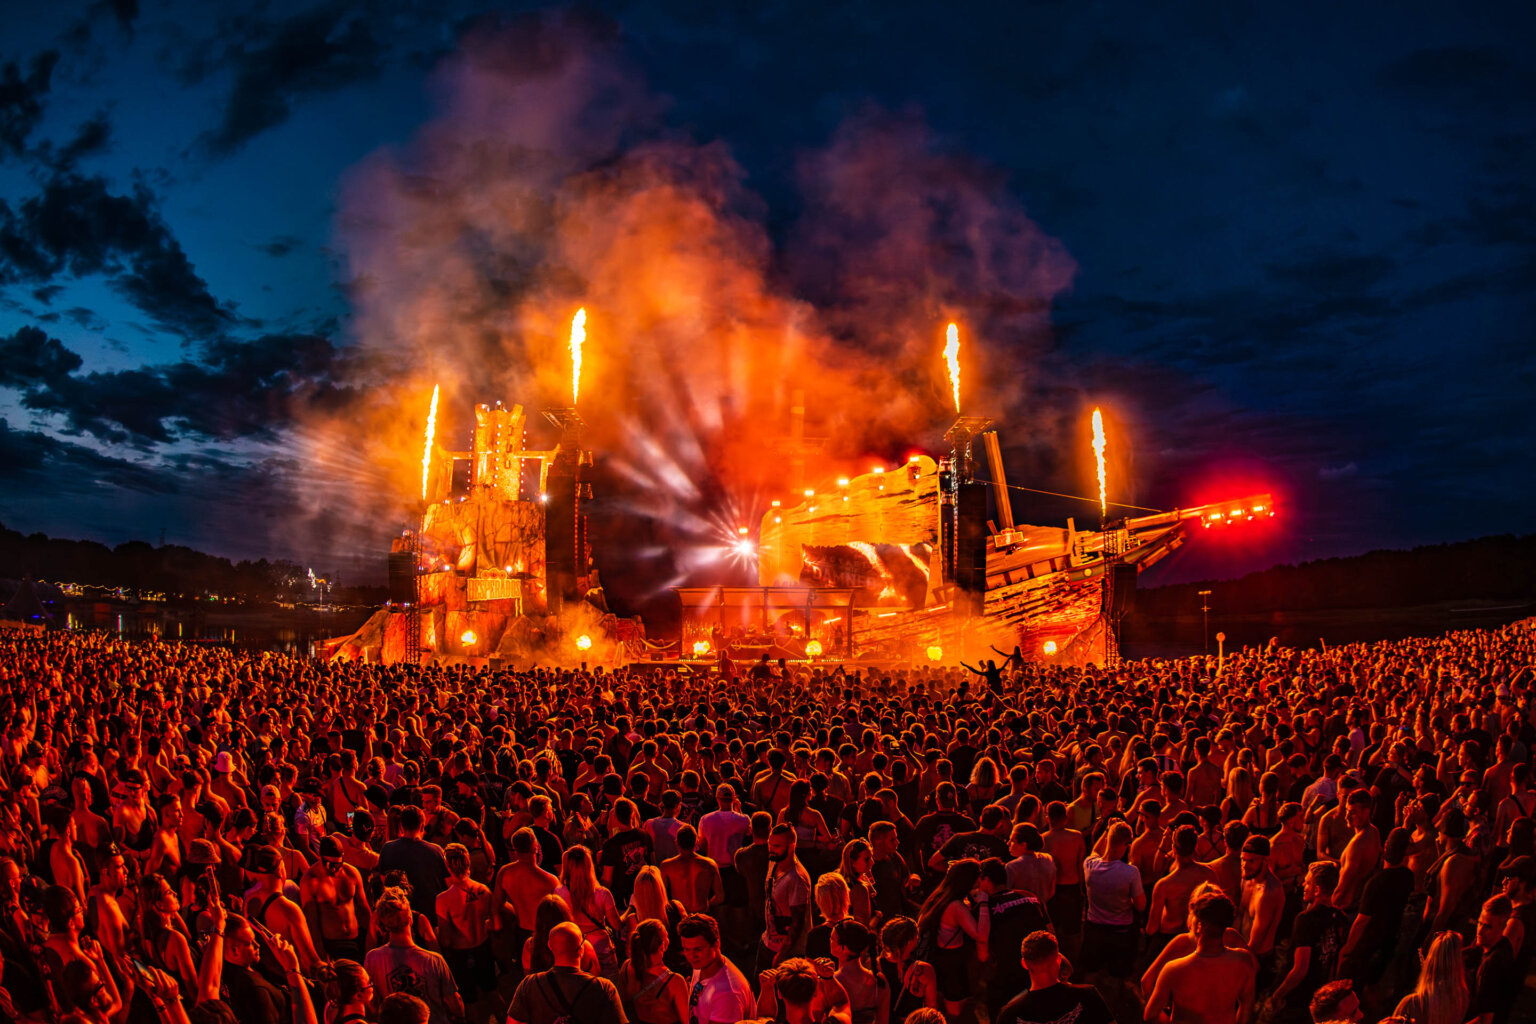 Check the full set of Barbaric Records at Dominator 2023 – Voyage of the Damned now!